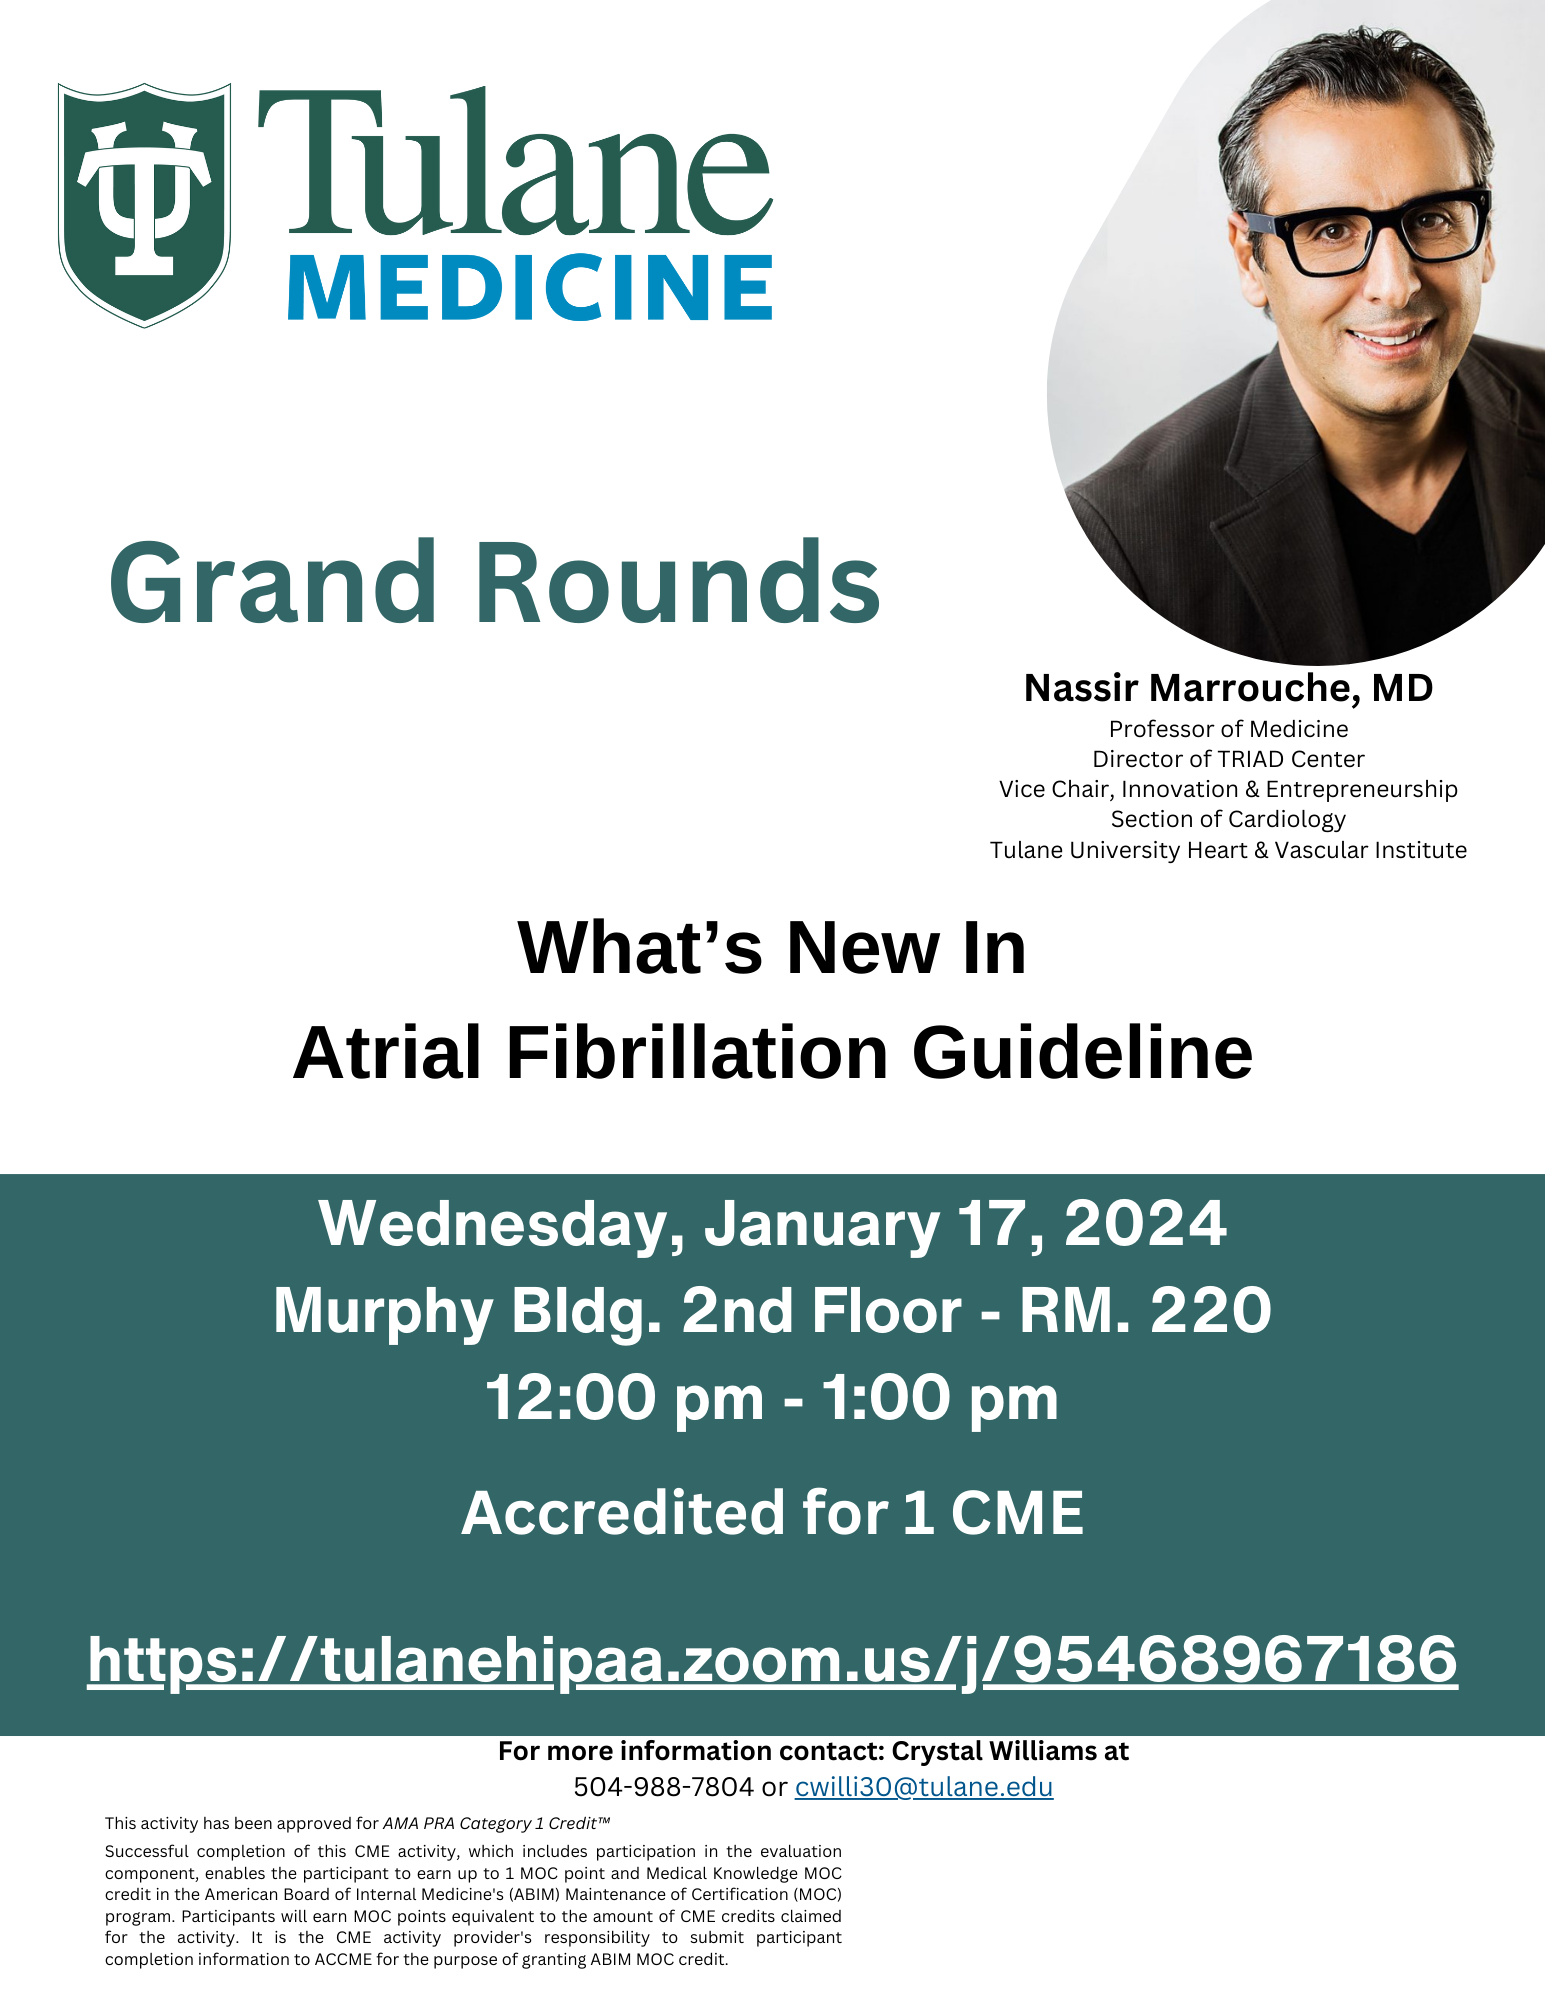 Nassir Marrouche, MD "What's New In Atrial Fibrillation Guideline"